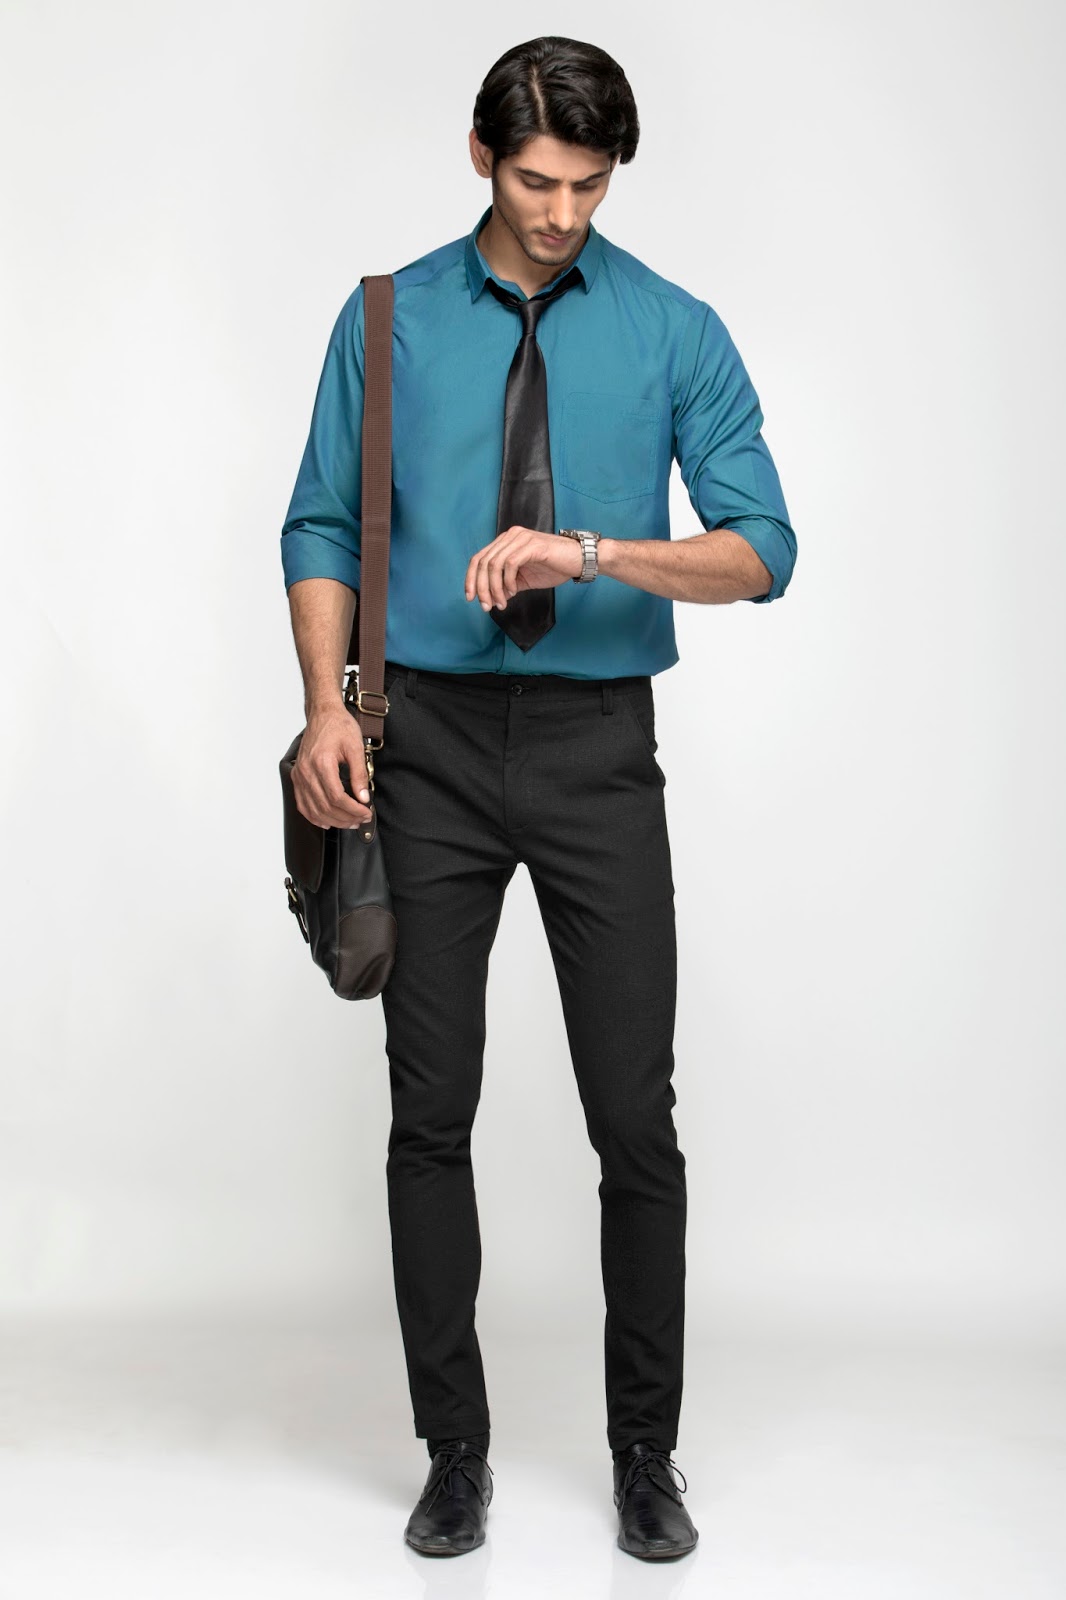 sdcds: Latest MEN's wear collection by TRYFA Online in India.